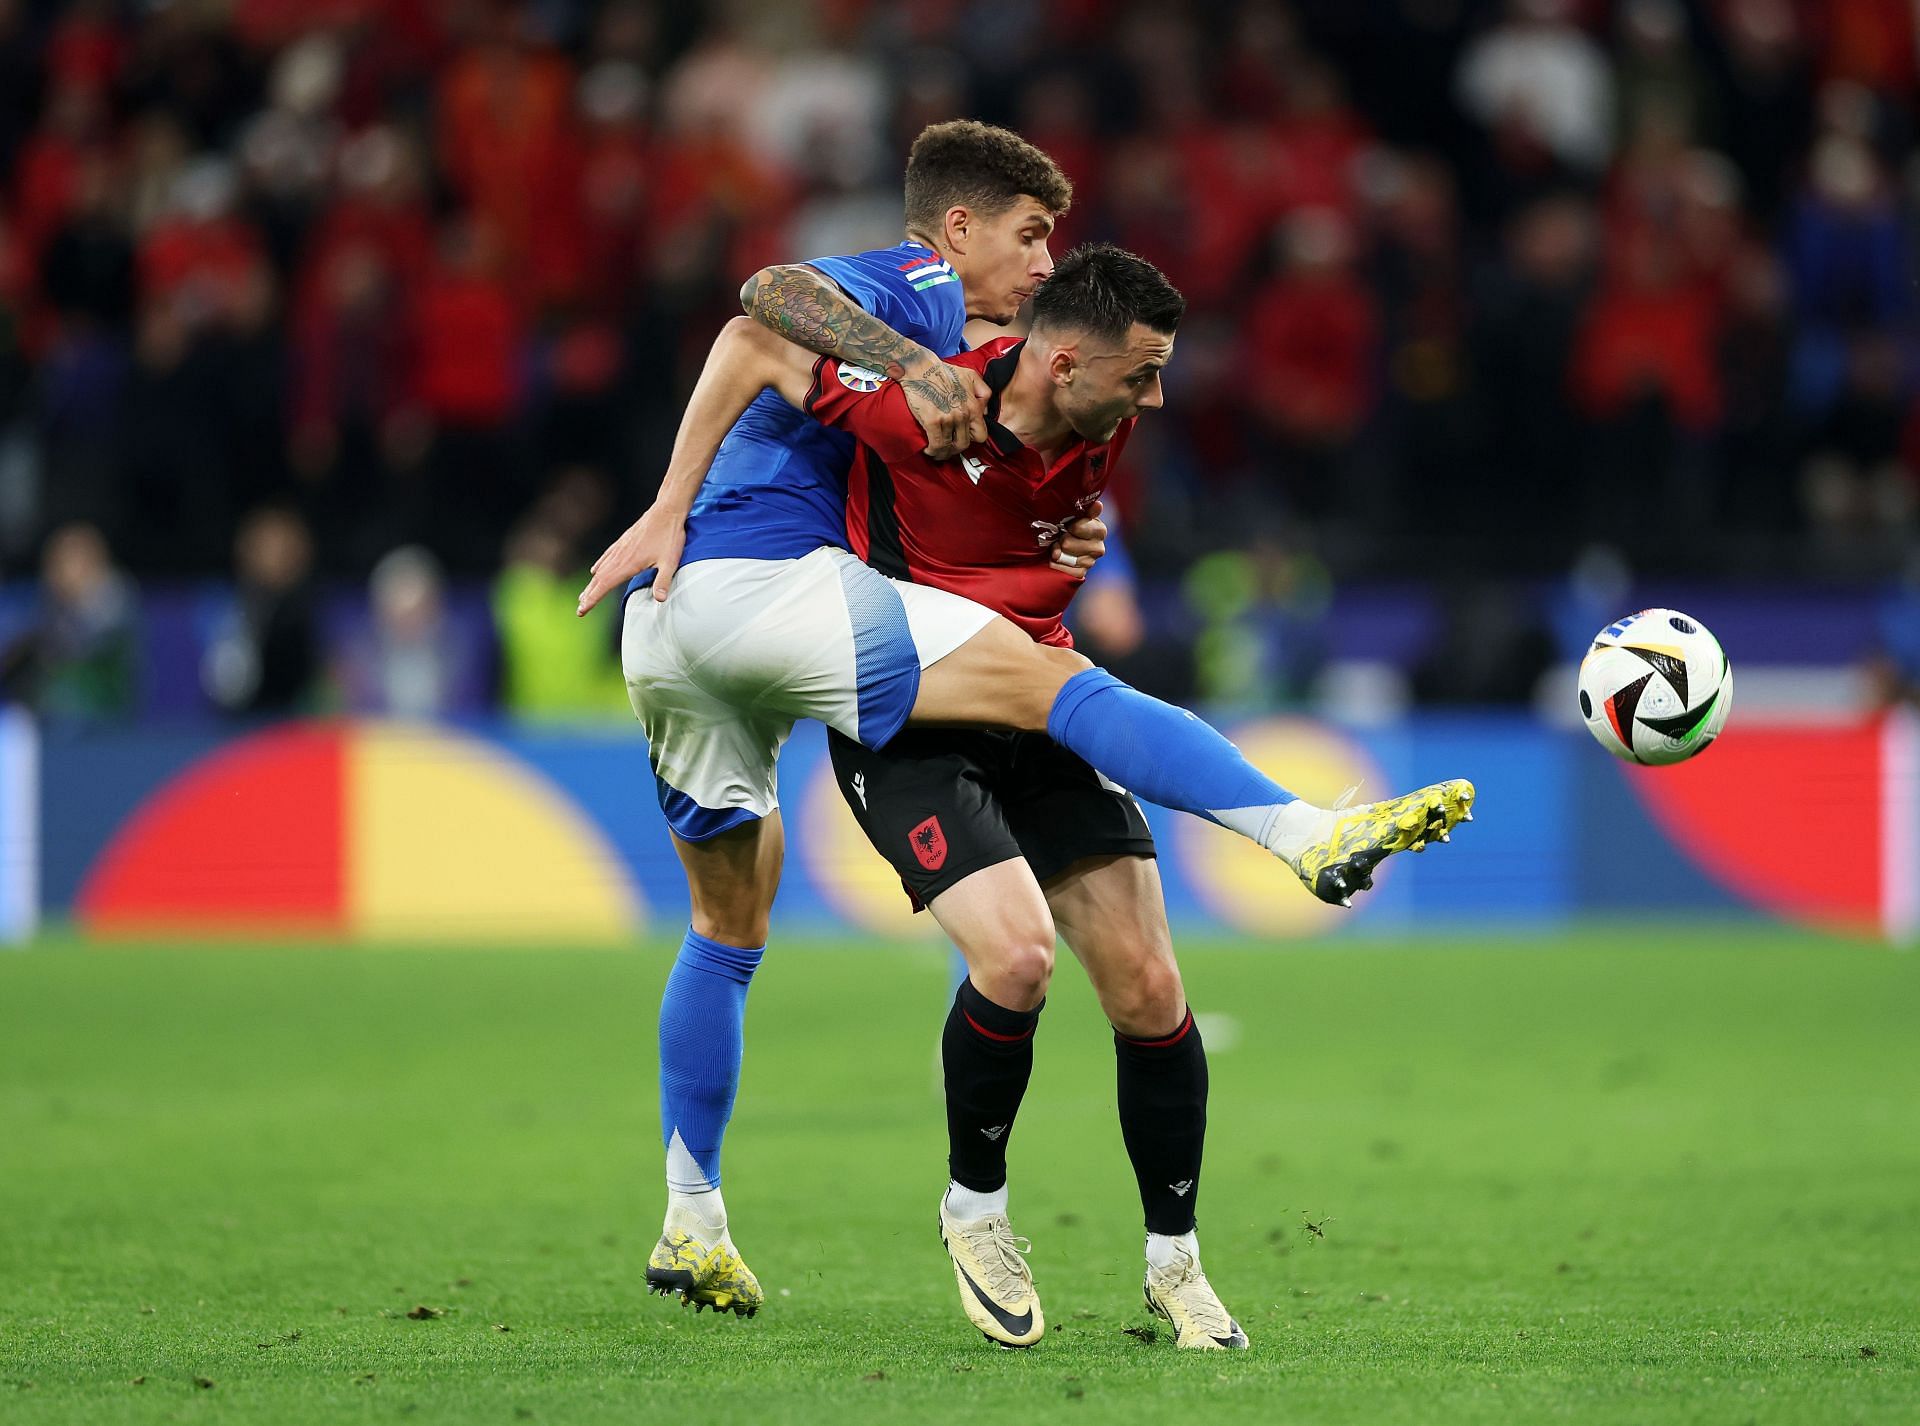 Italy 2-1 Albania: Italy Player Ratings as they overcome early shock for comfortable win | 2024 European Championship